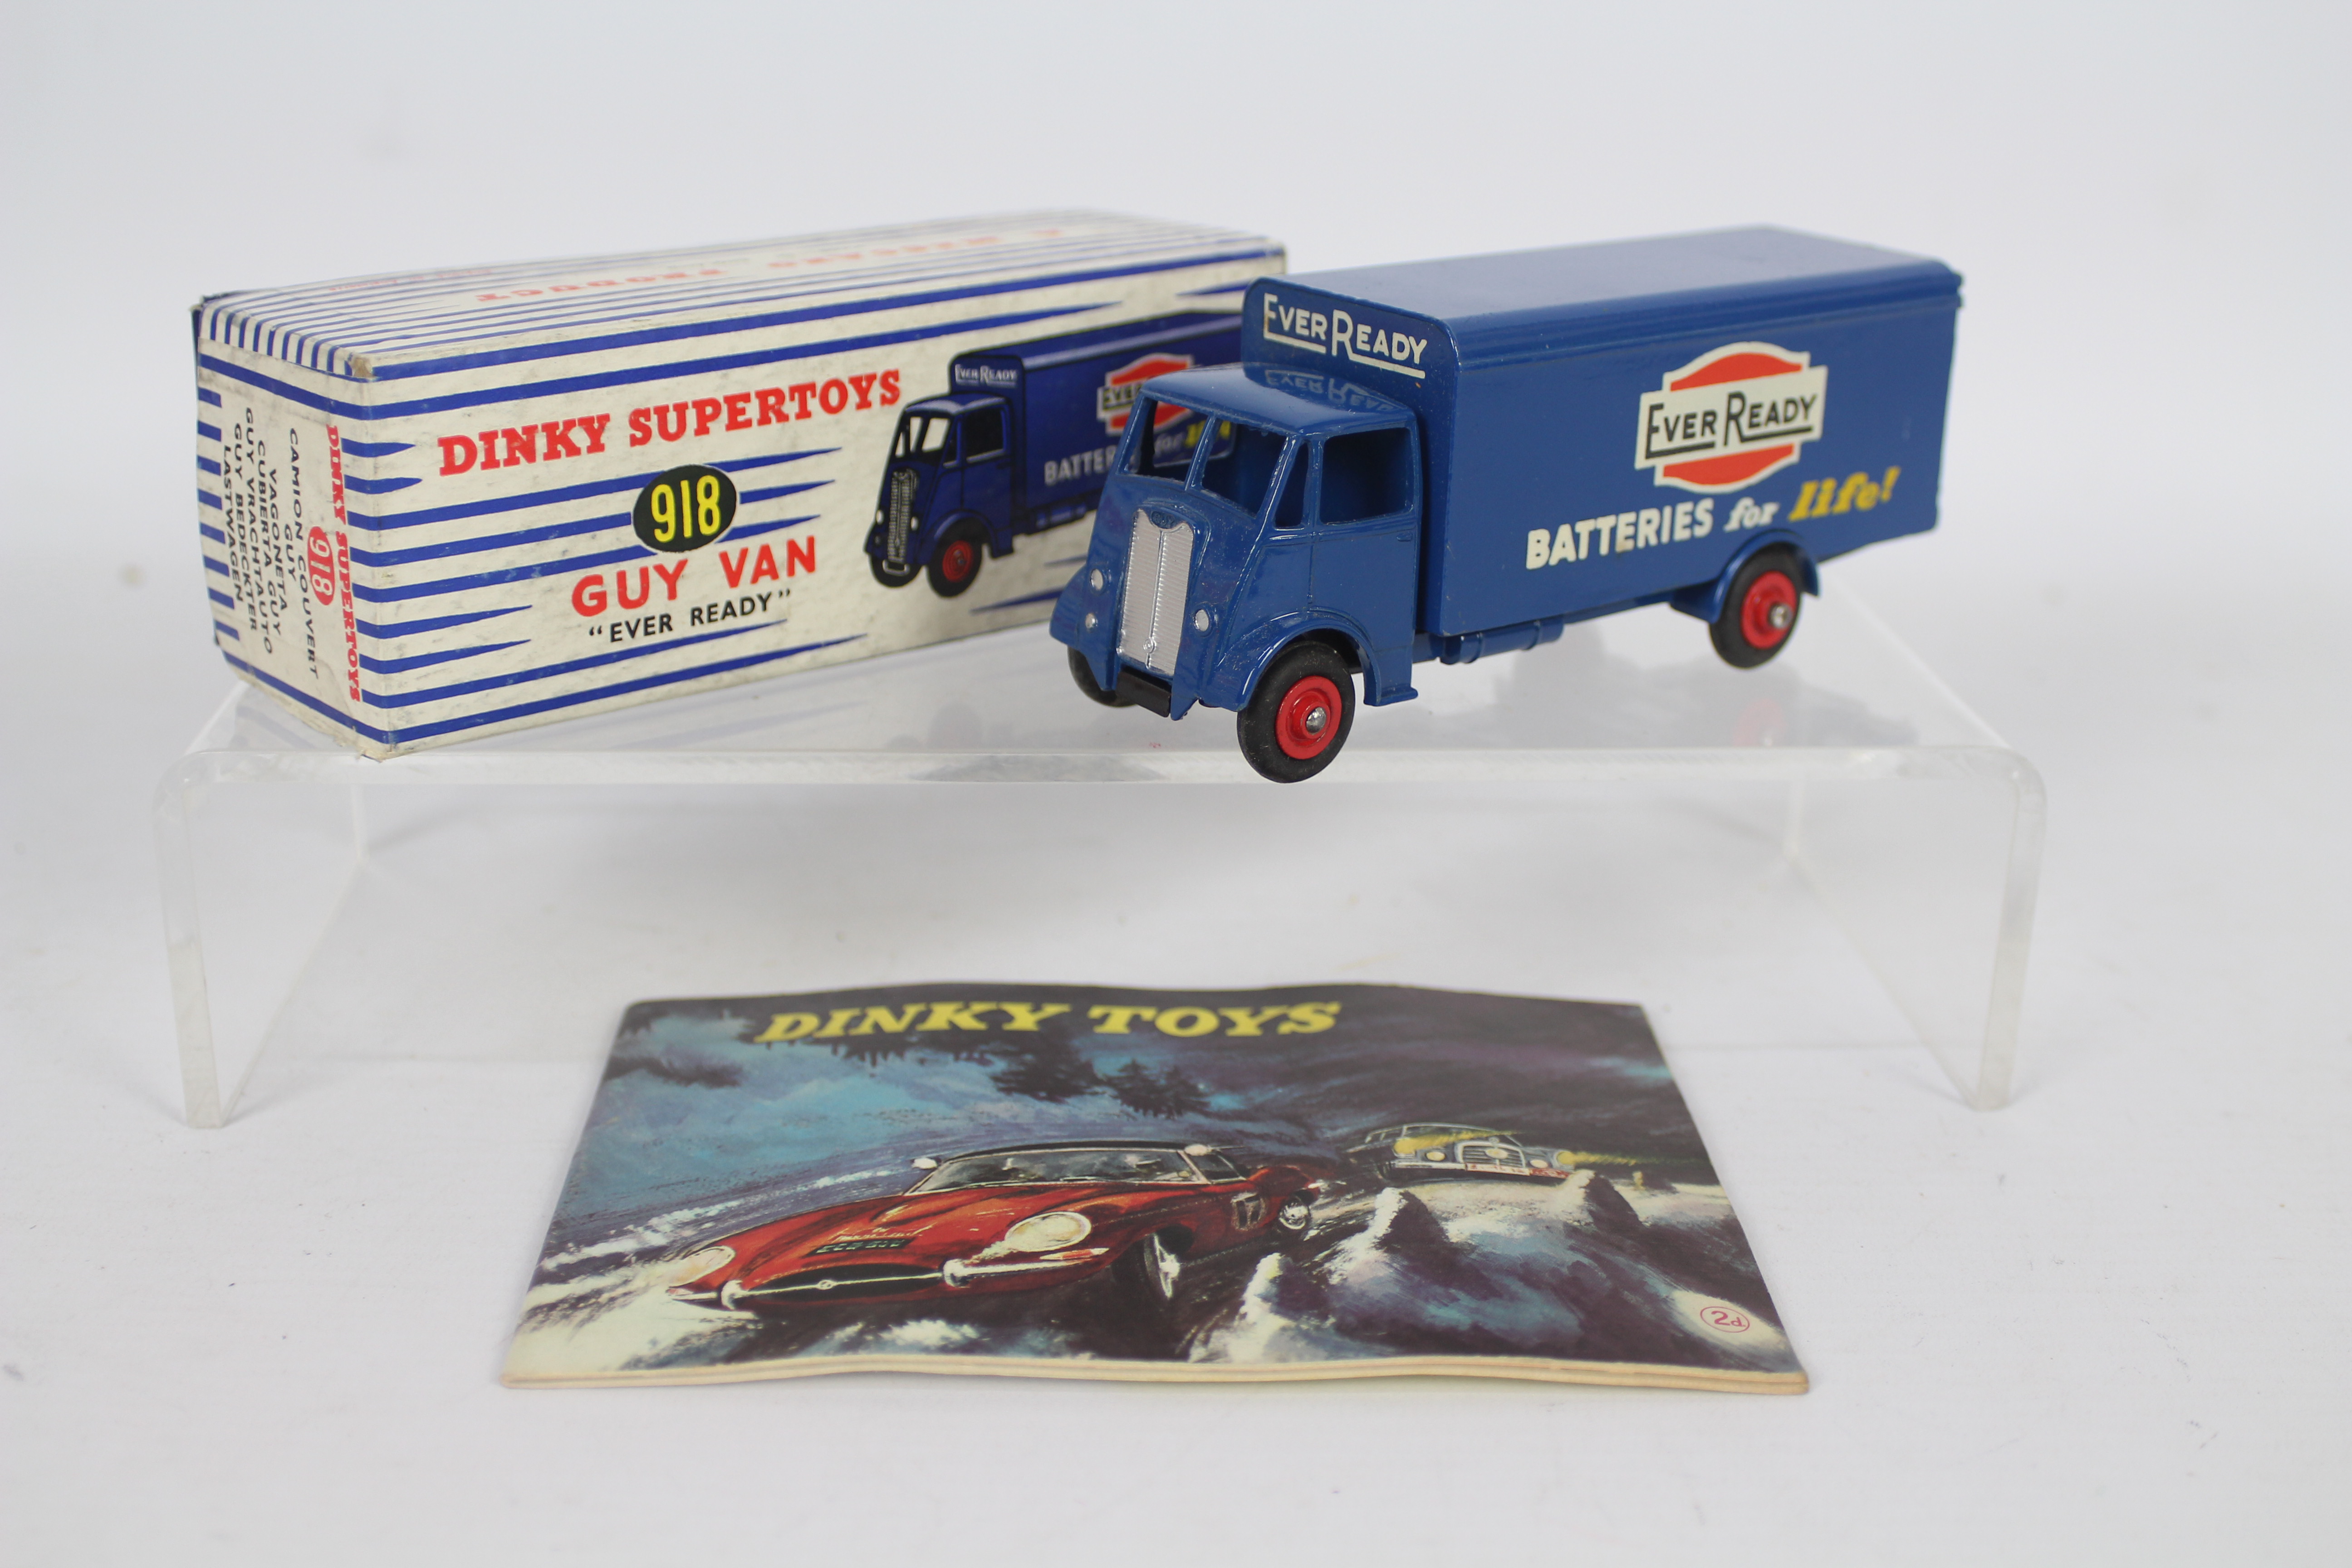 Dinky - A boxed Dinky # 918 Guy Ever Ready Van.